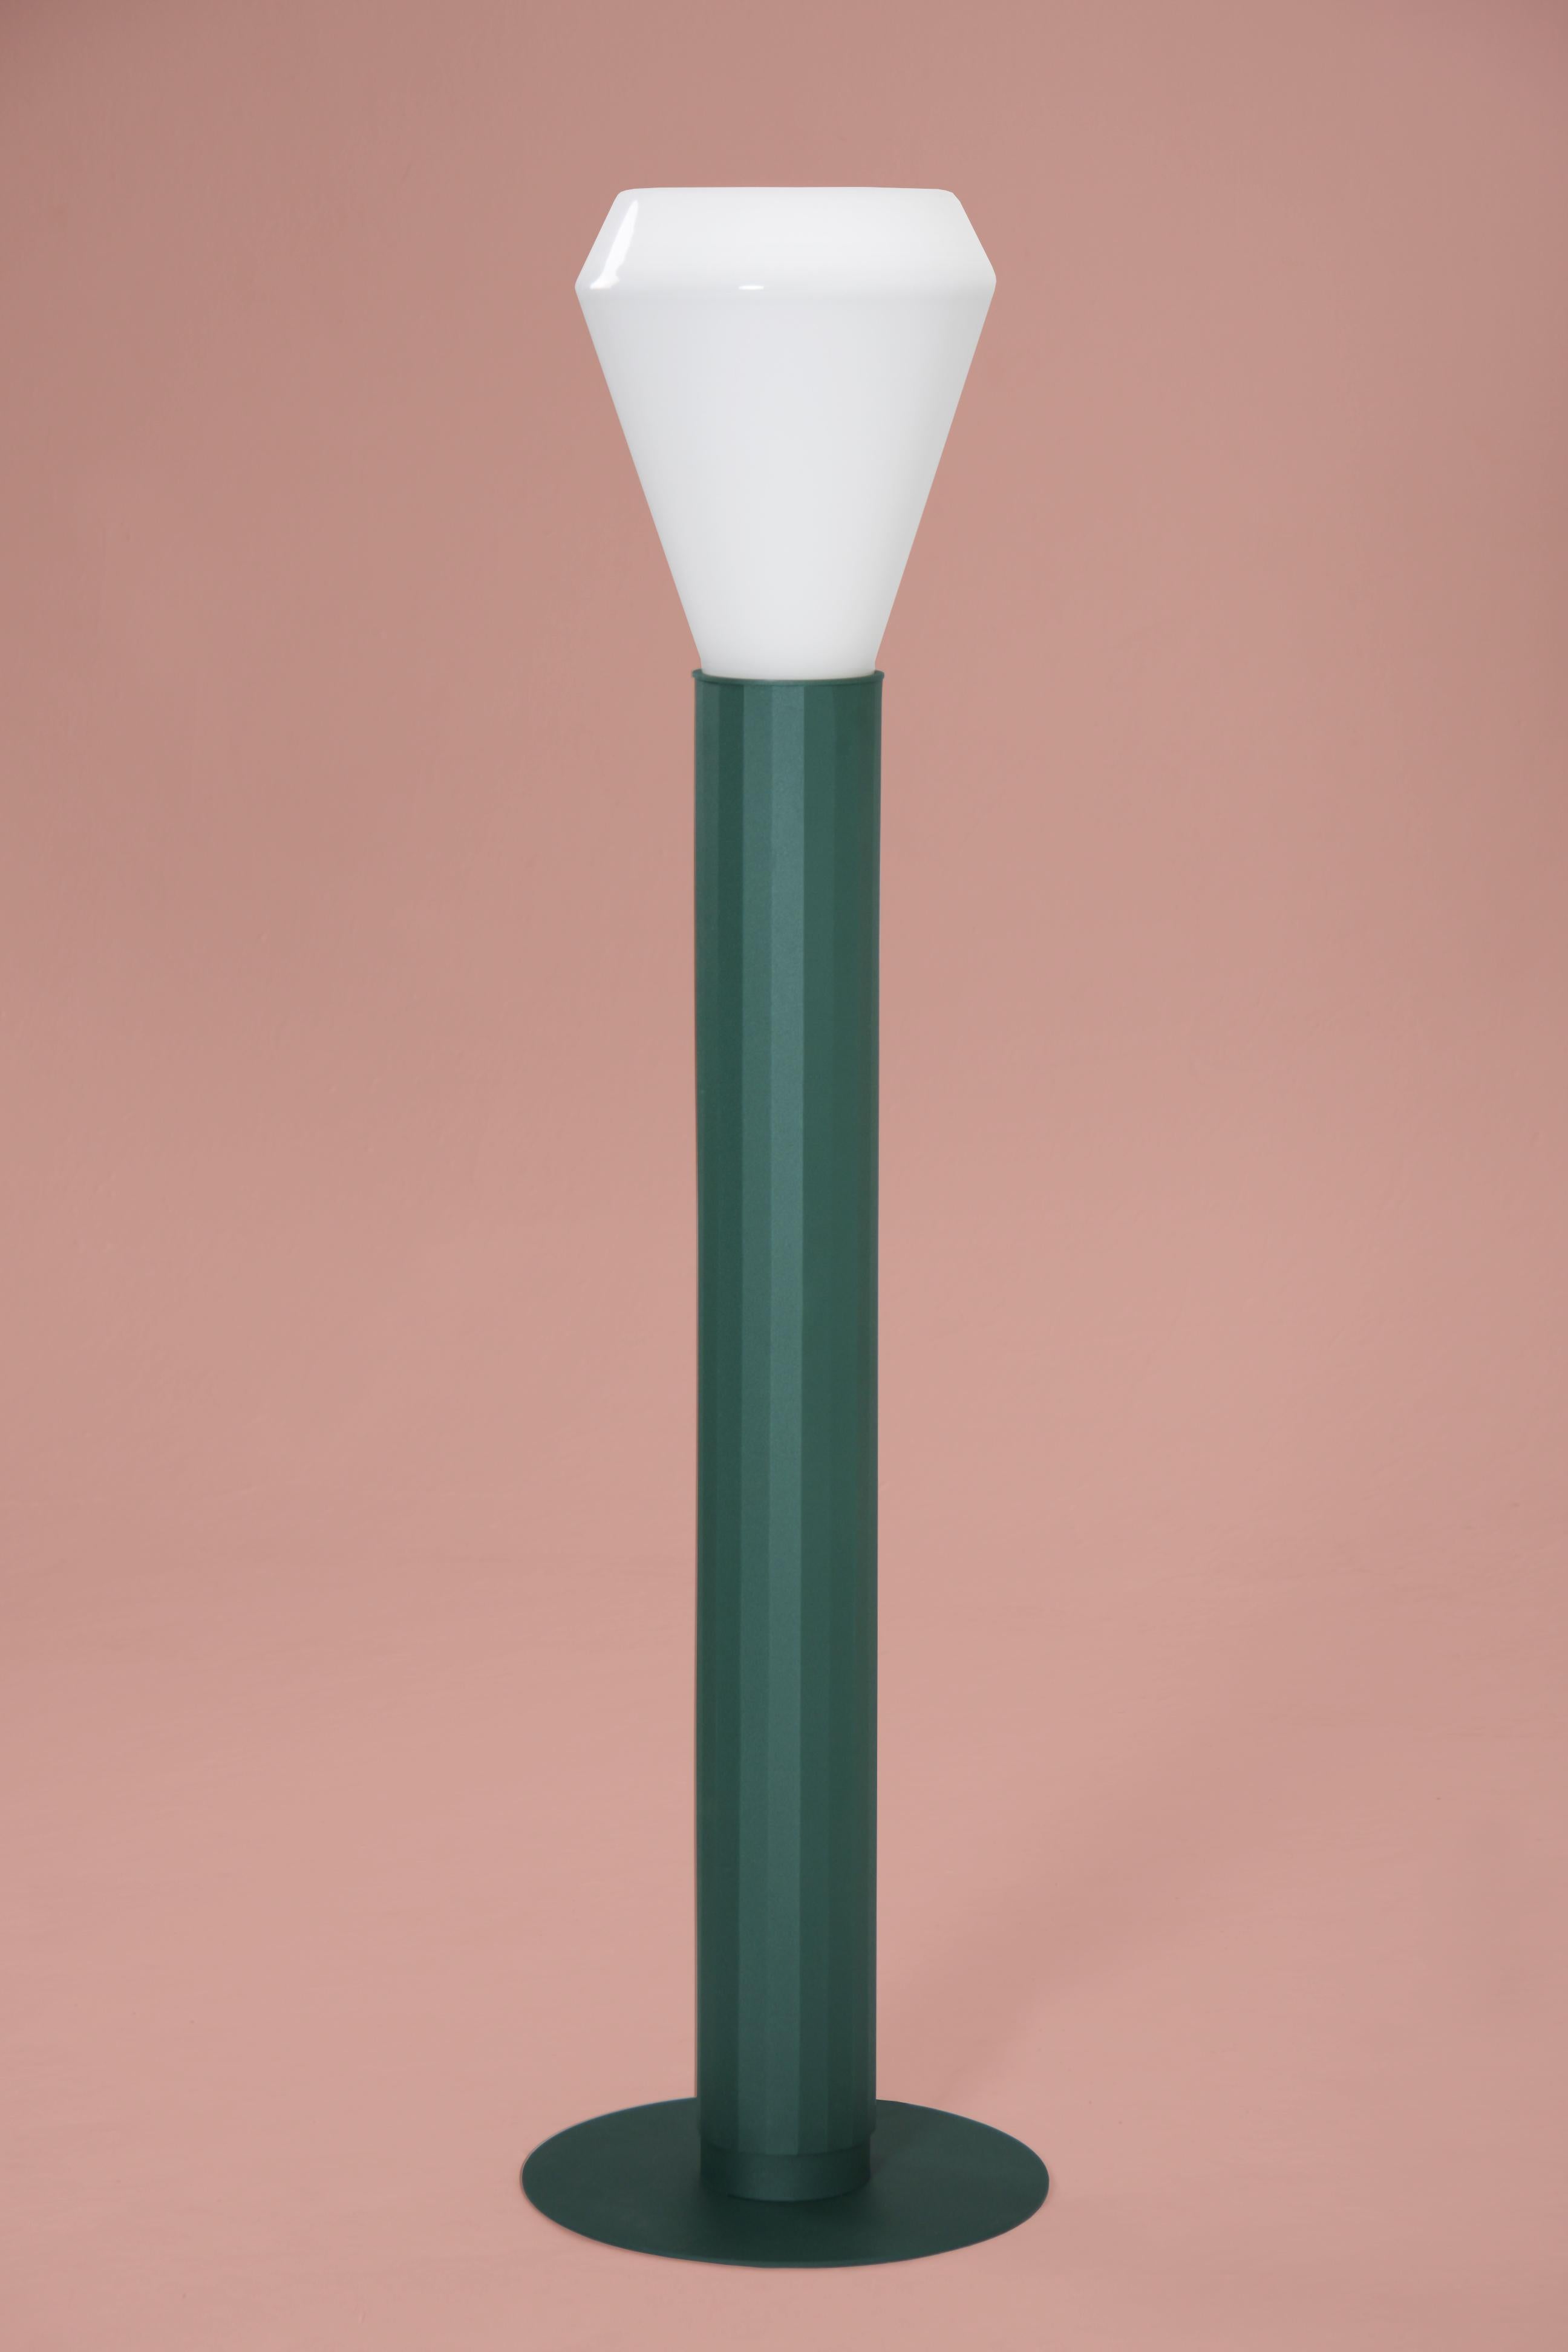 Hand-Crafted Floor Lamp in Powder-Coated Steel and Milk Glass Handcrafted For Sale